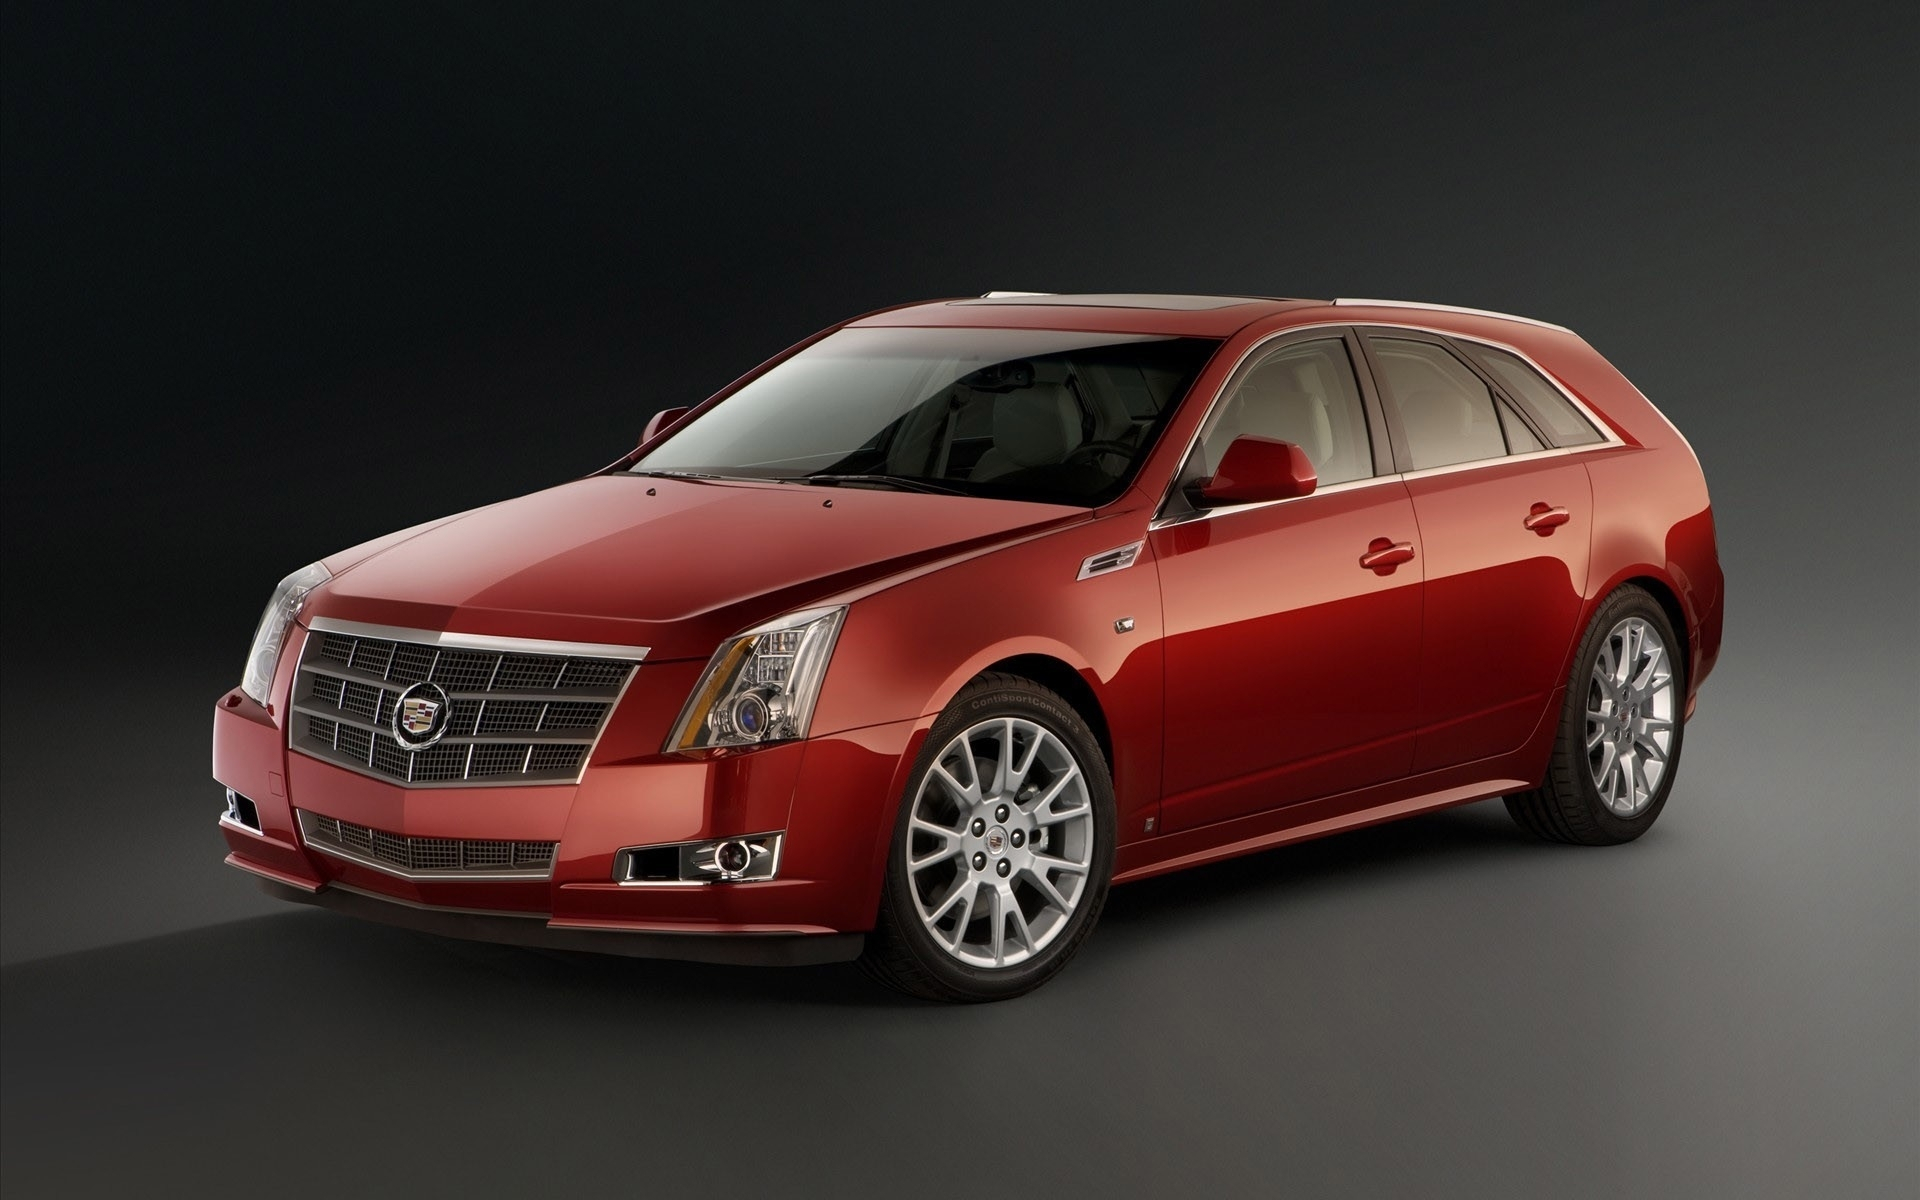 Wallpapers Cadillac station wagon red on the desktop